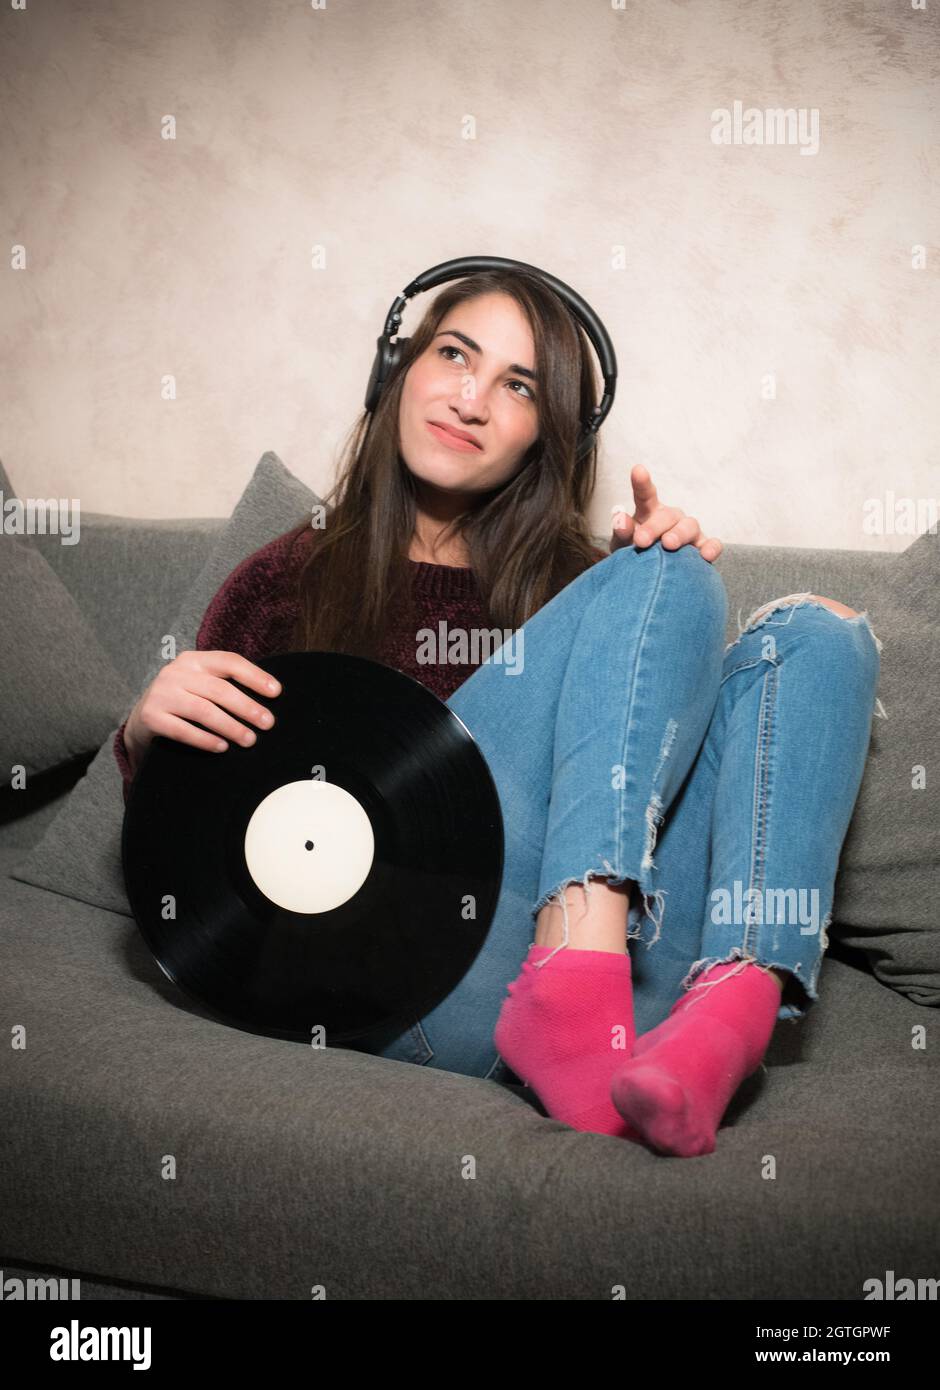 Smiling Young Woman With Record Sitting On Sofa At Home Stock Photo